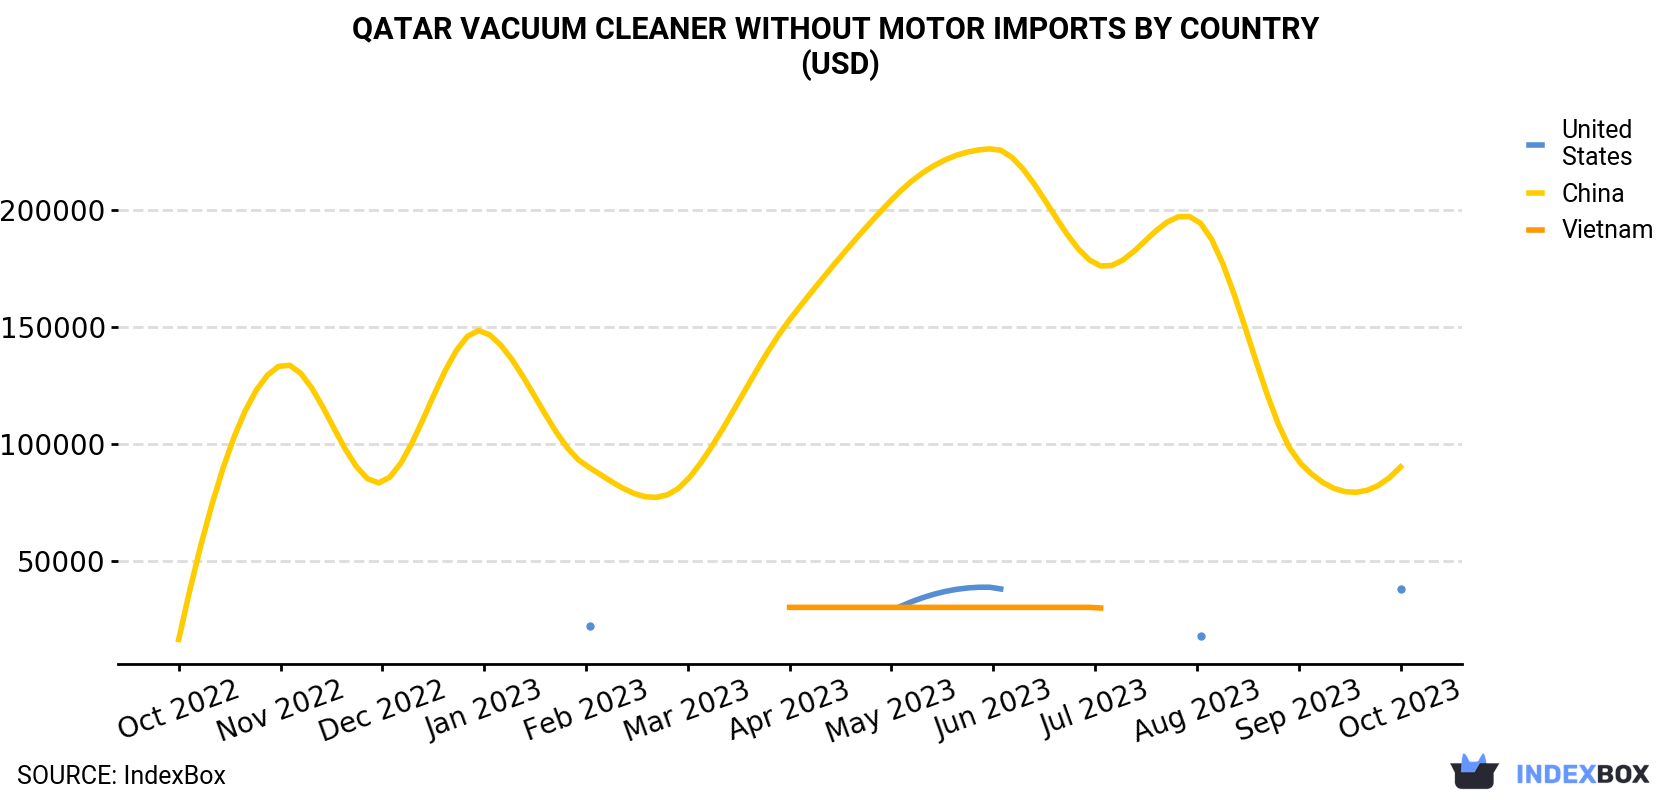 Qatar Vacuum Cleaner Without Motor Imports By Country (USD)